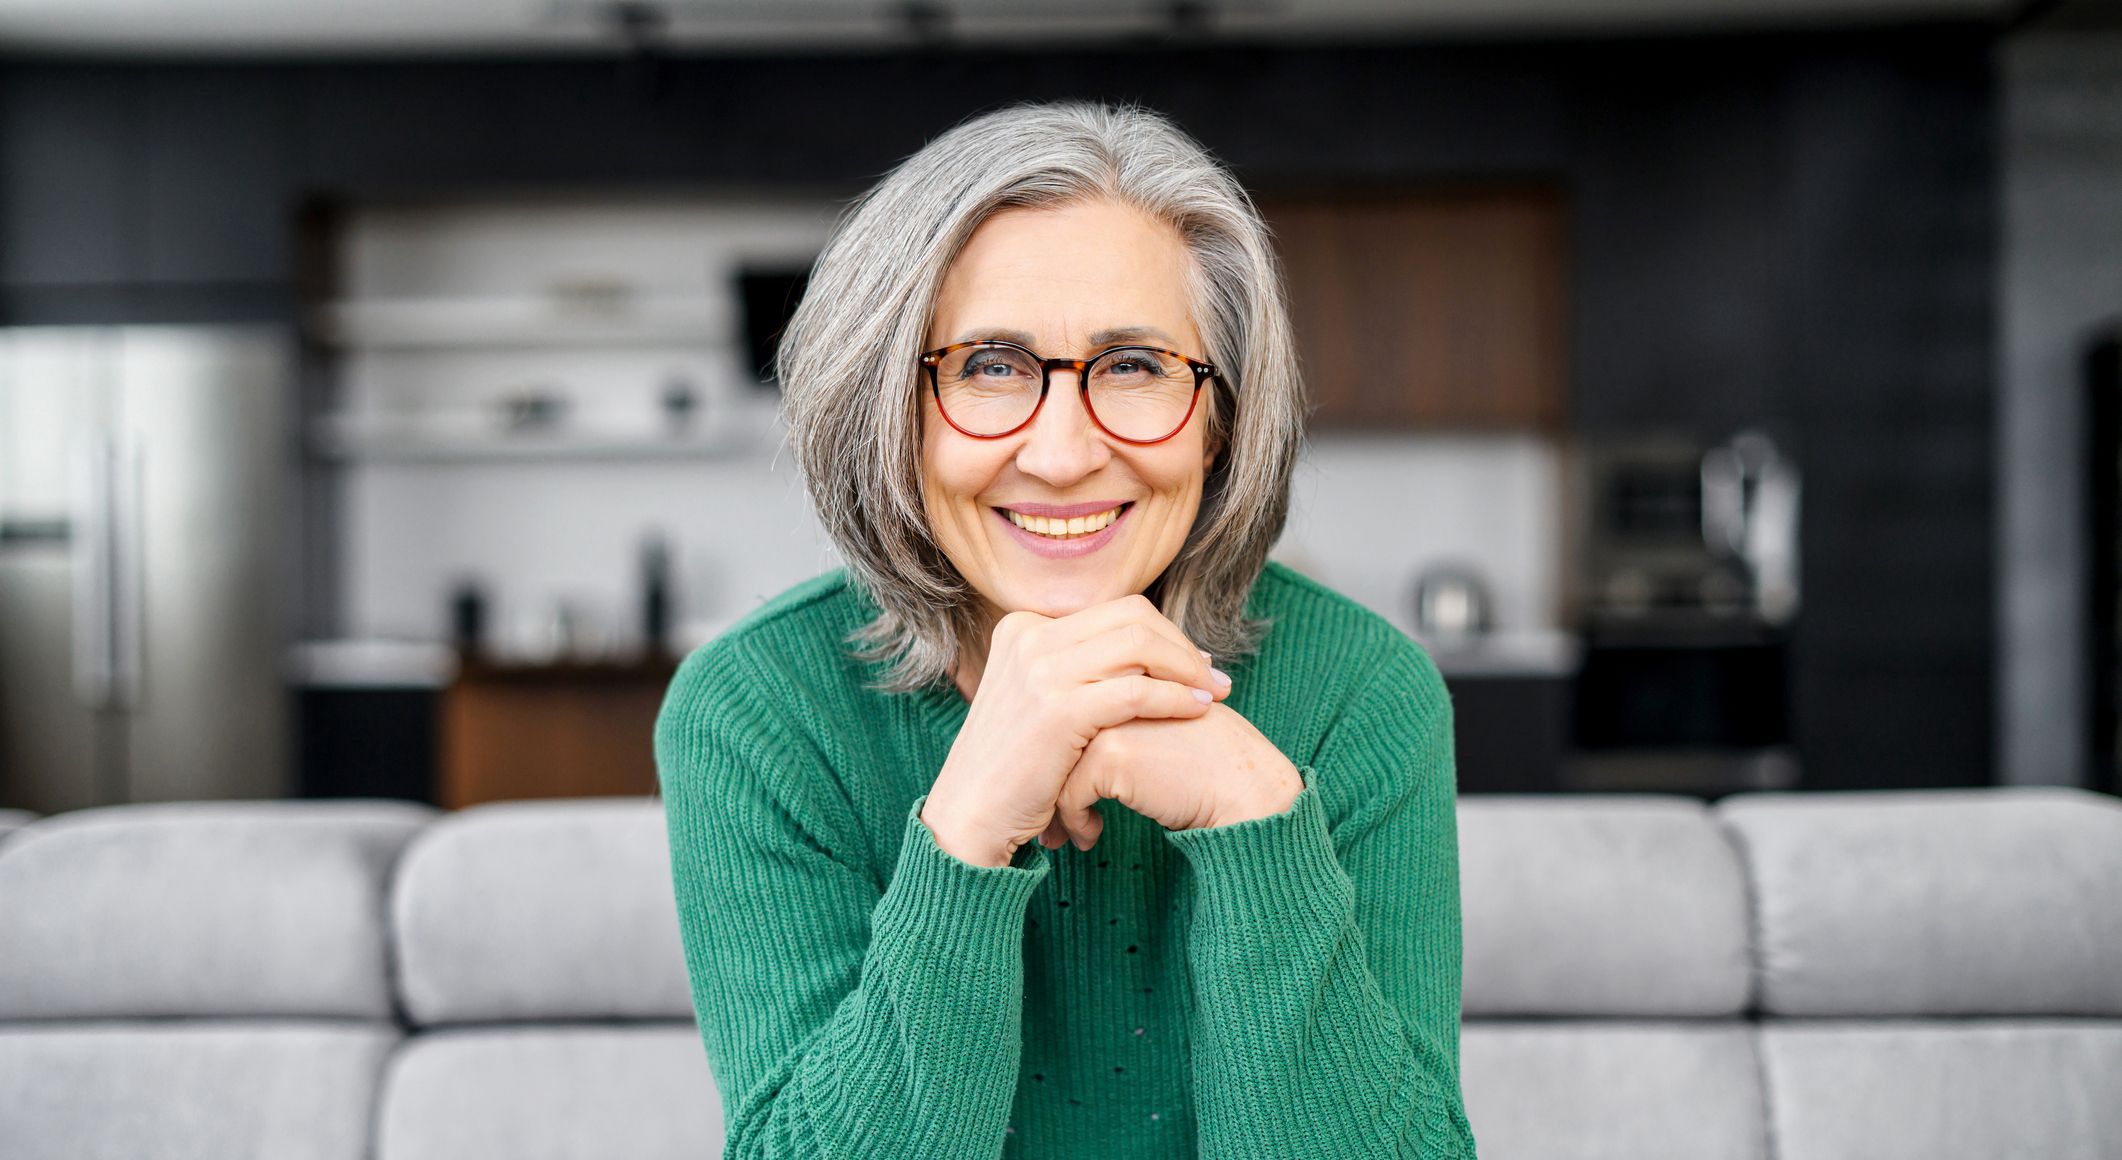 older woman smiling with glasses on